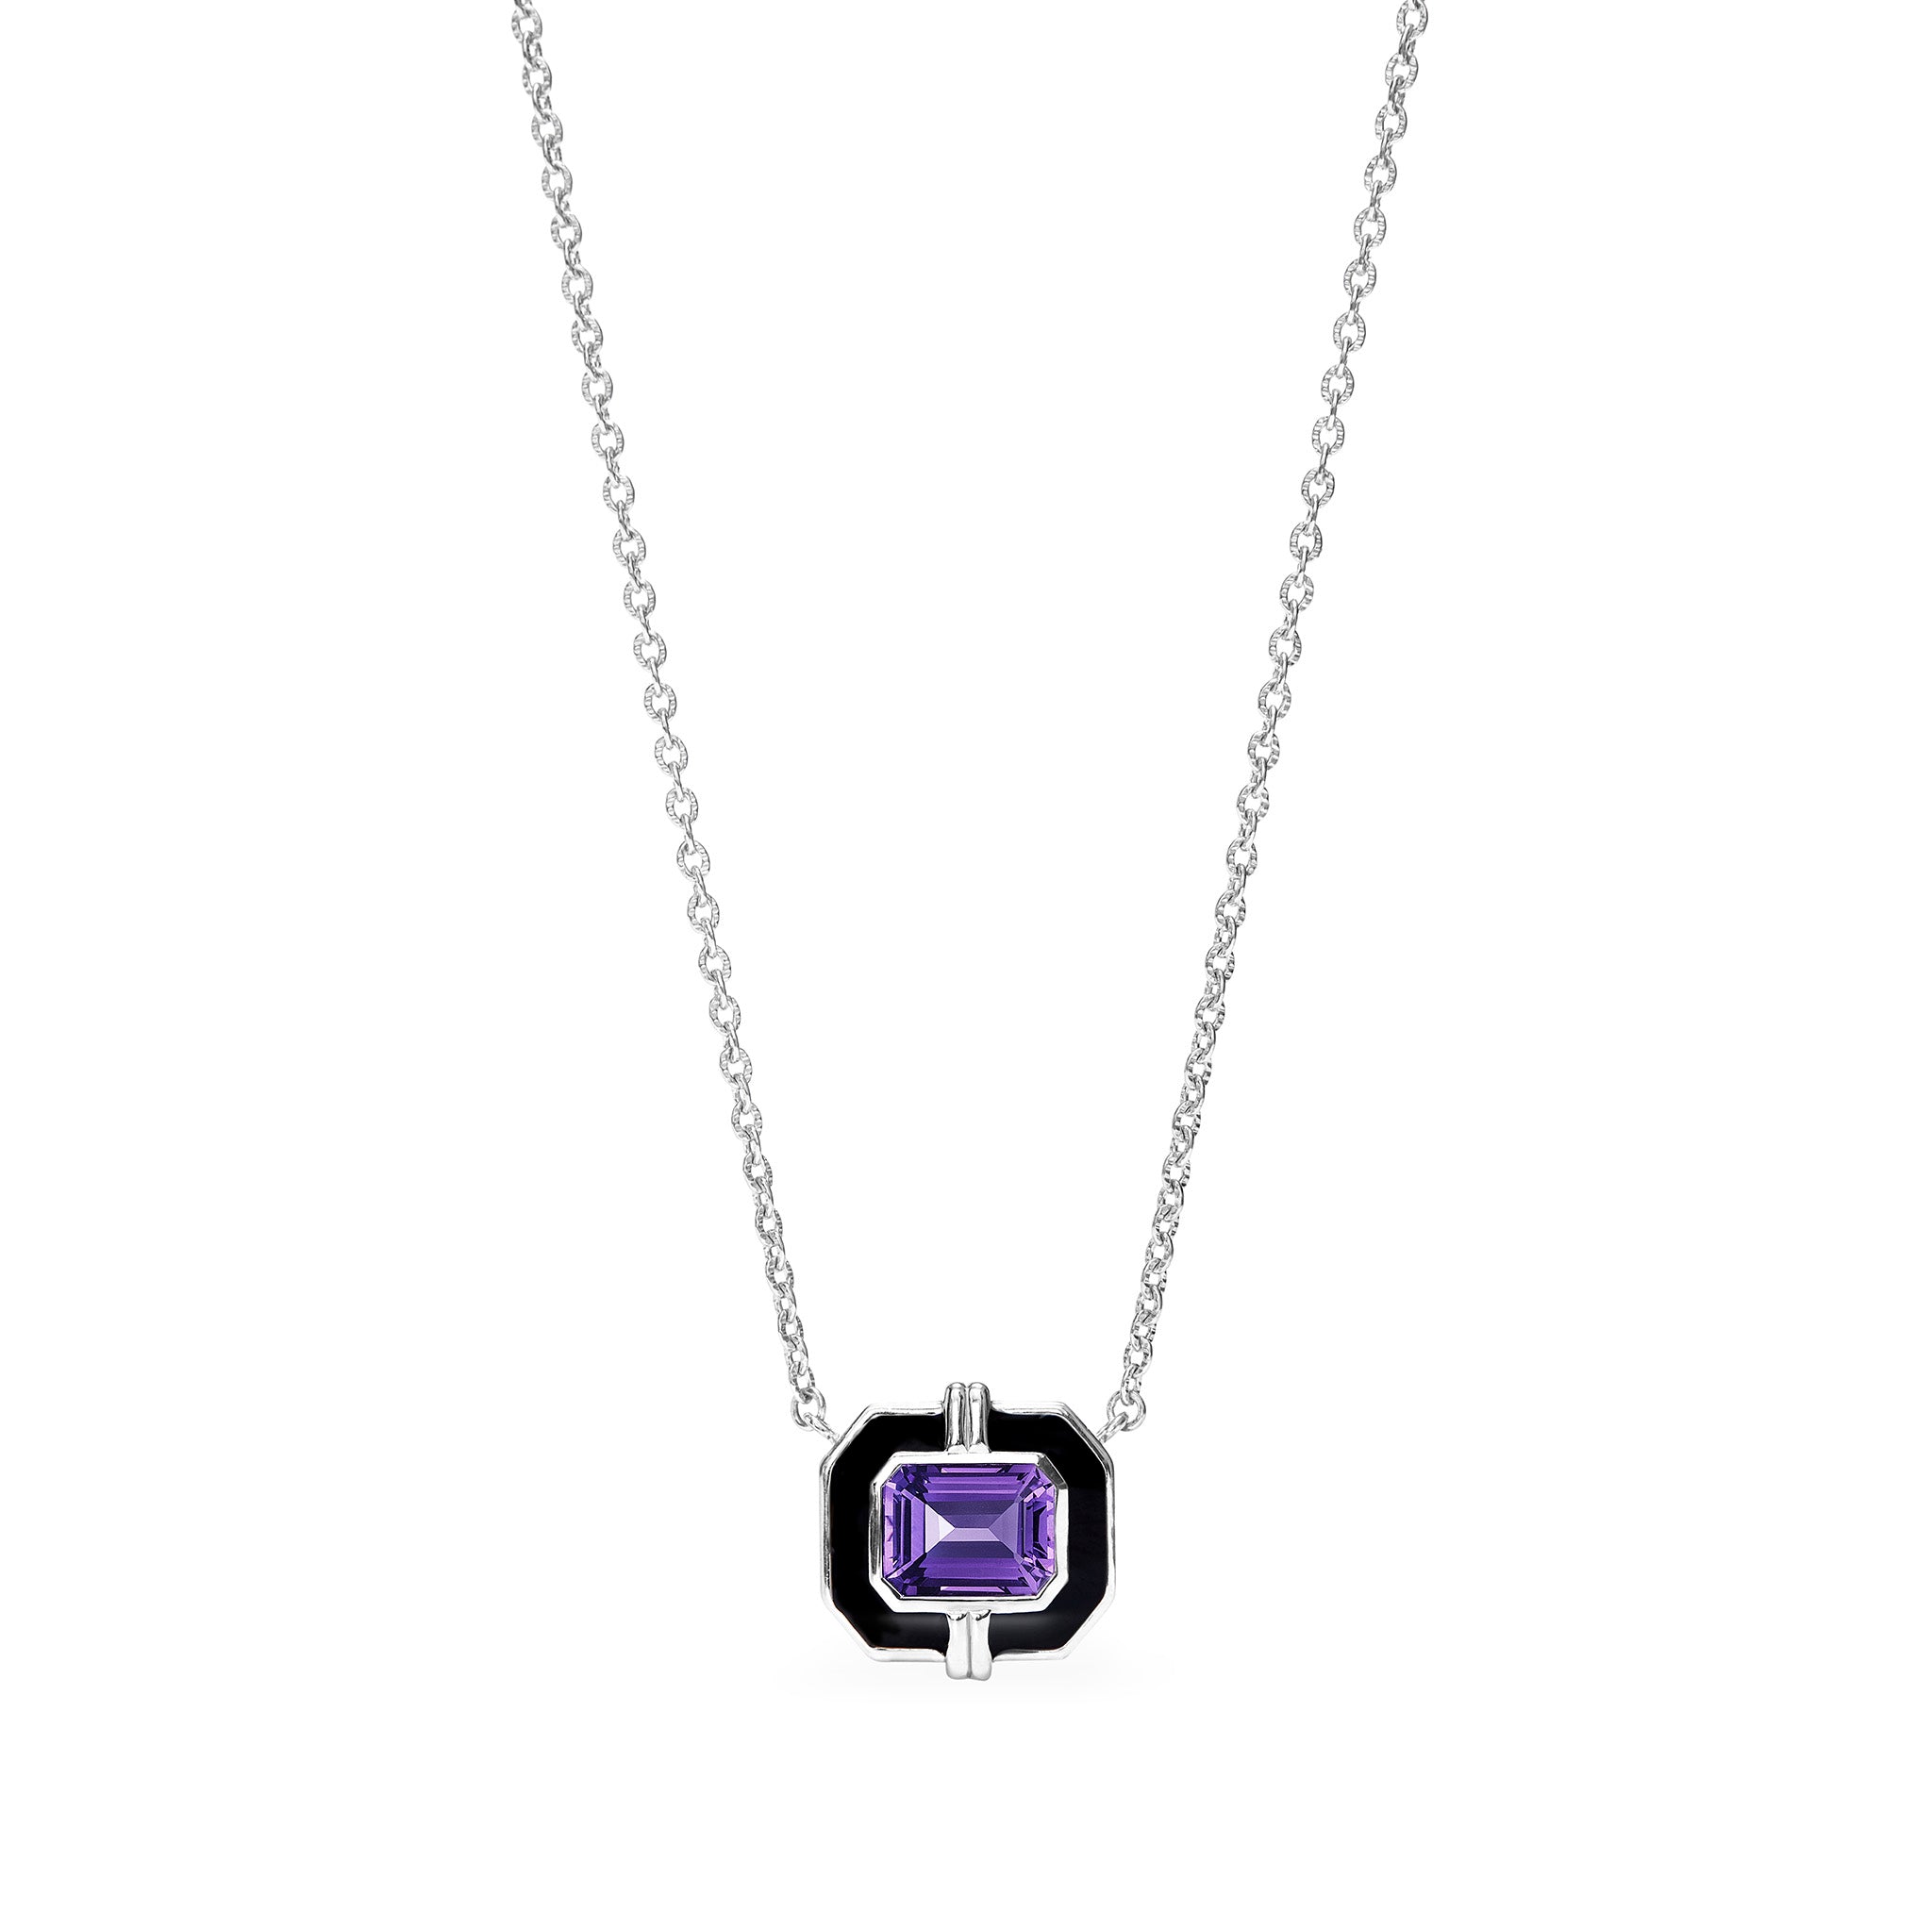 Adrienne Necklace With Enamel And Amethyst